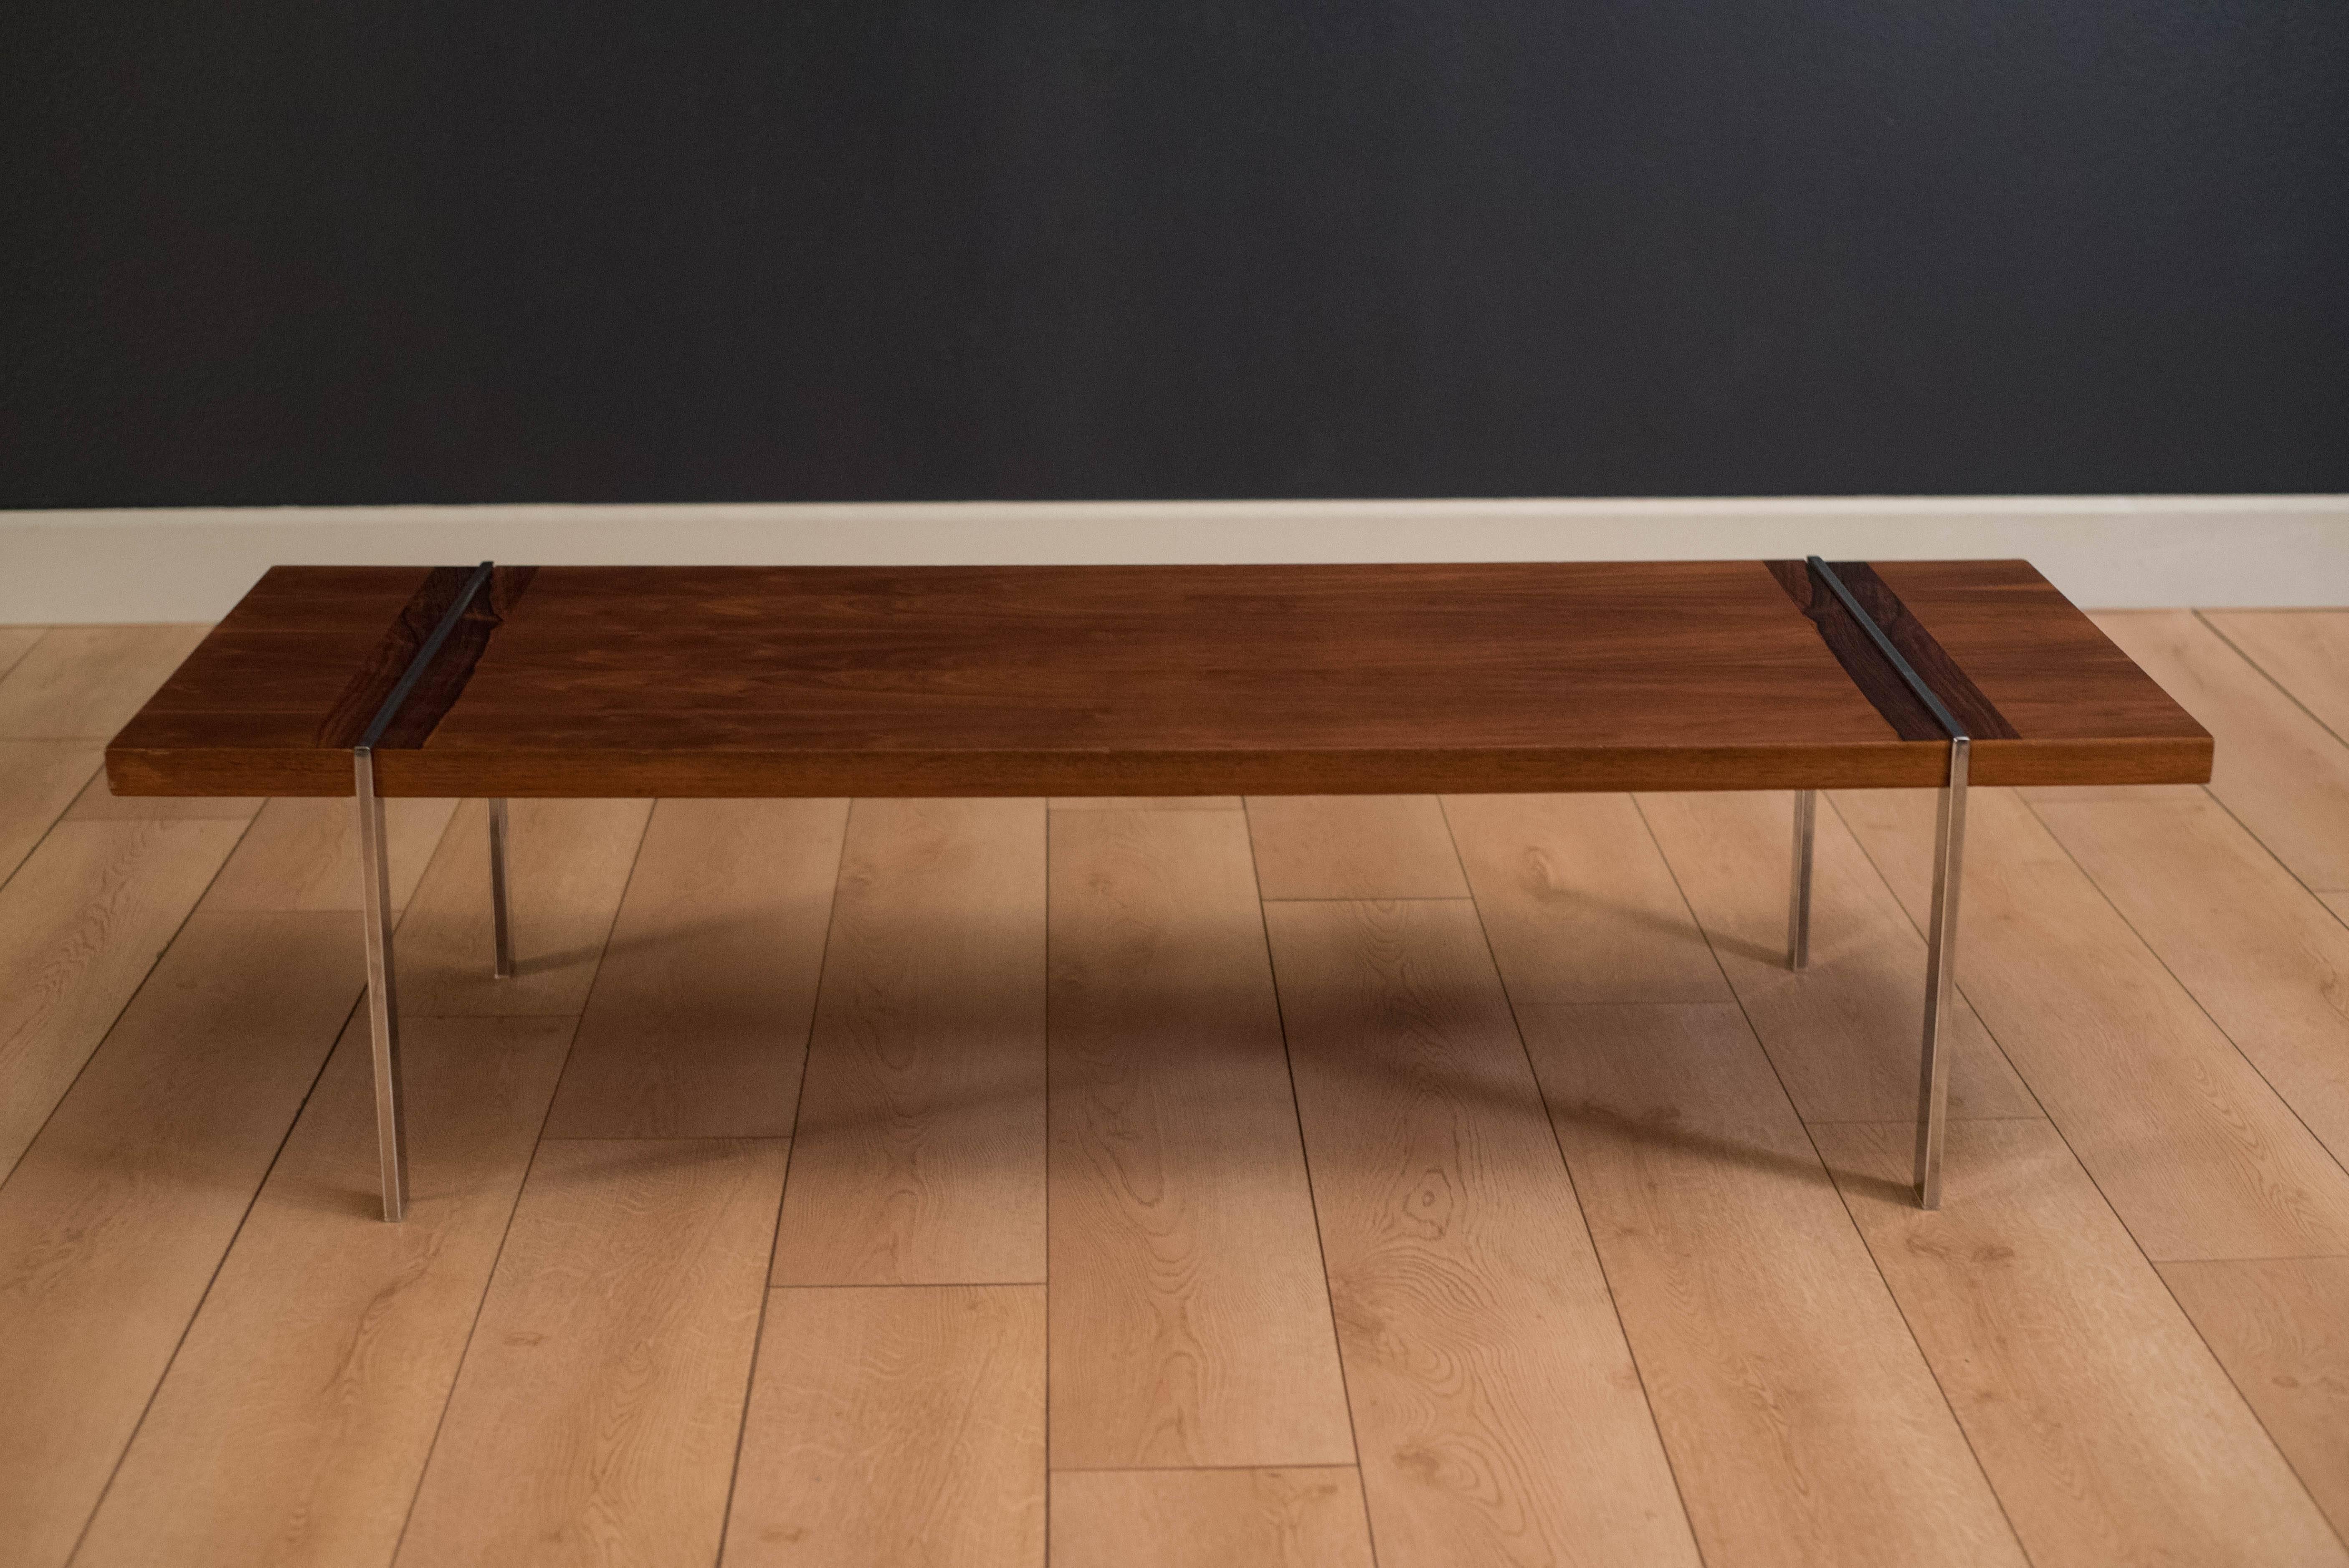 Midcentury coffee table manufactured by Lane in walnut. This piece has a unique chrome base with rosewood accents.